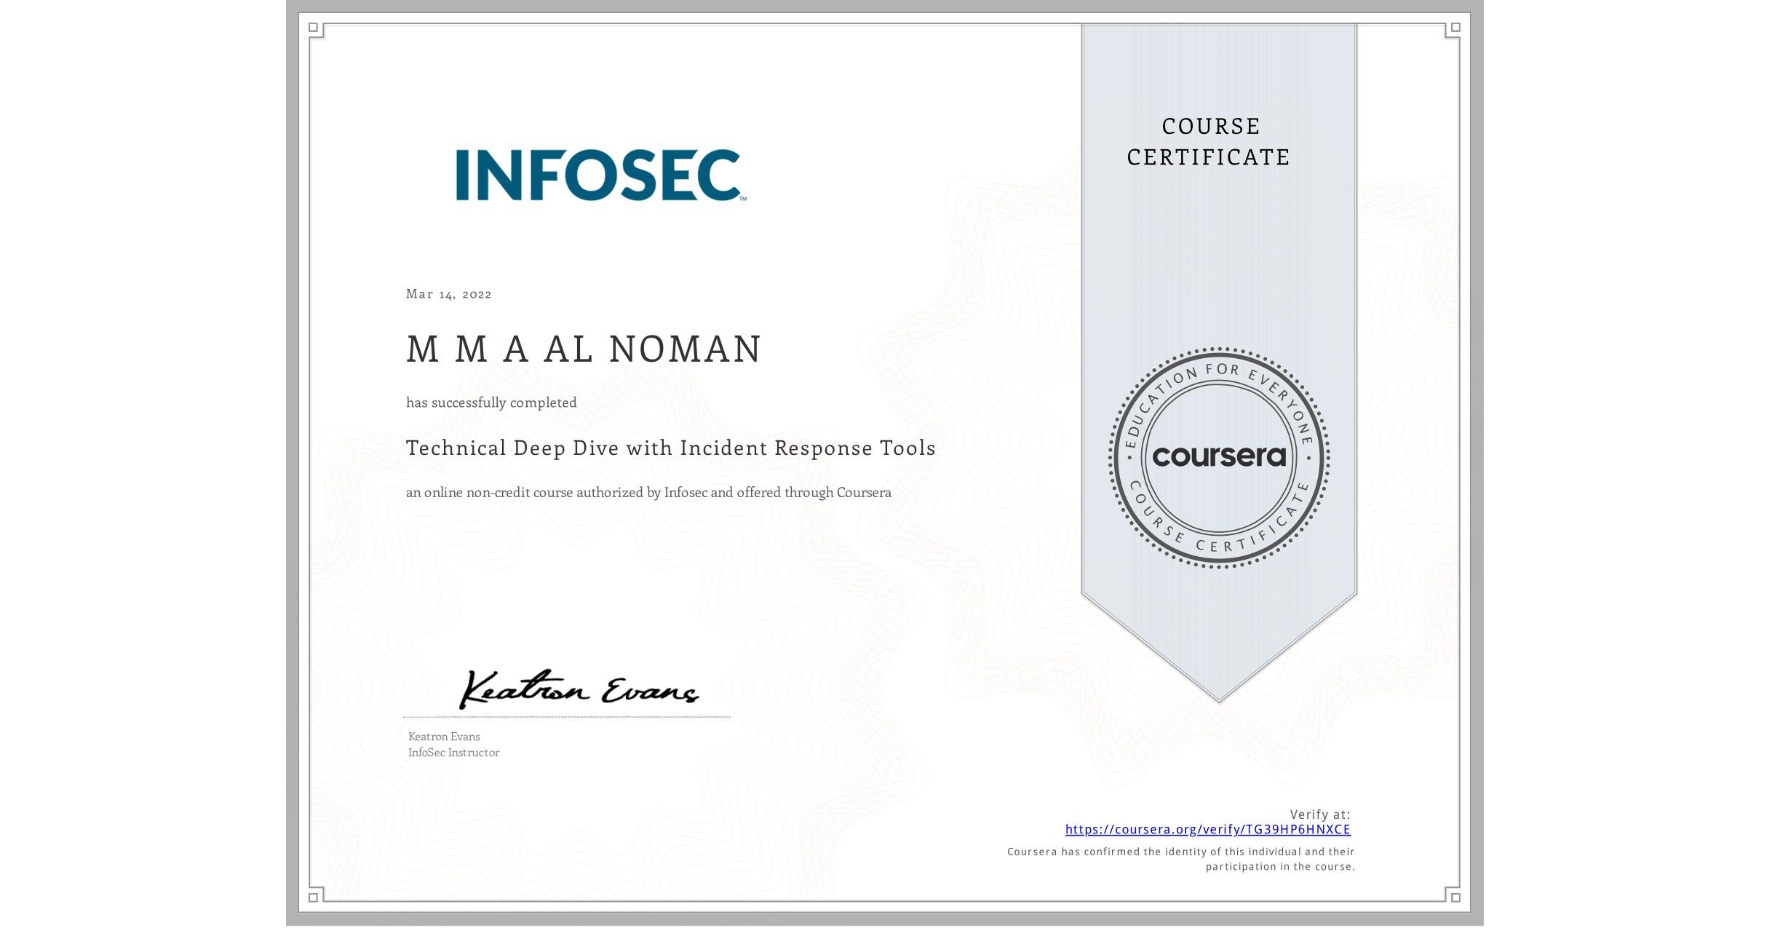 Technical Deep Dive with Incident Response Tools, Coursera